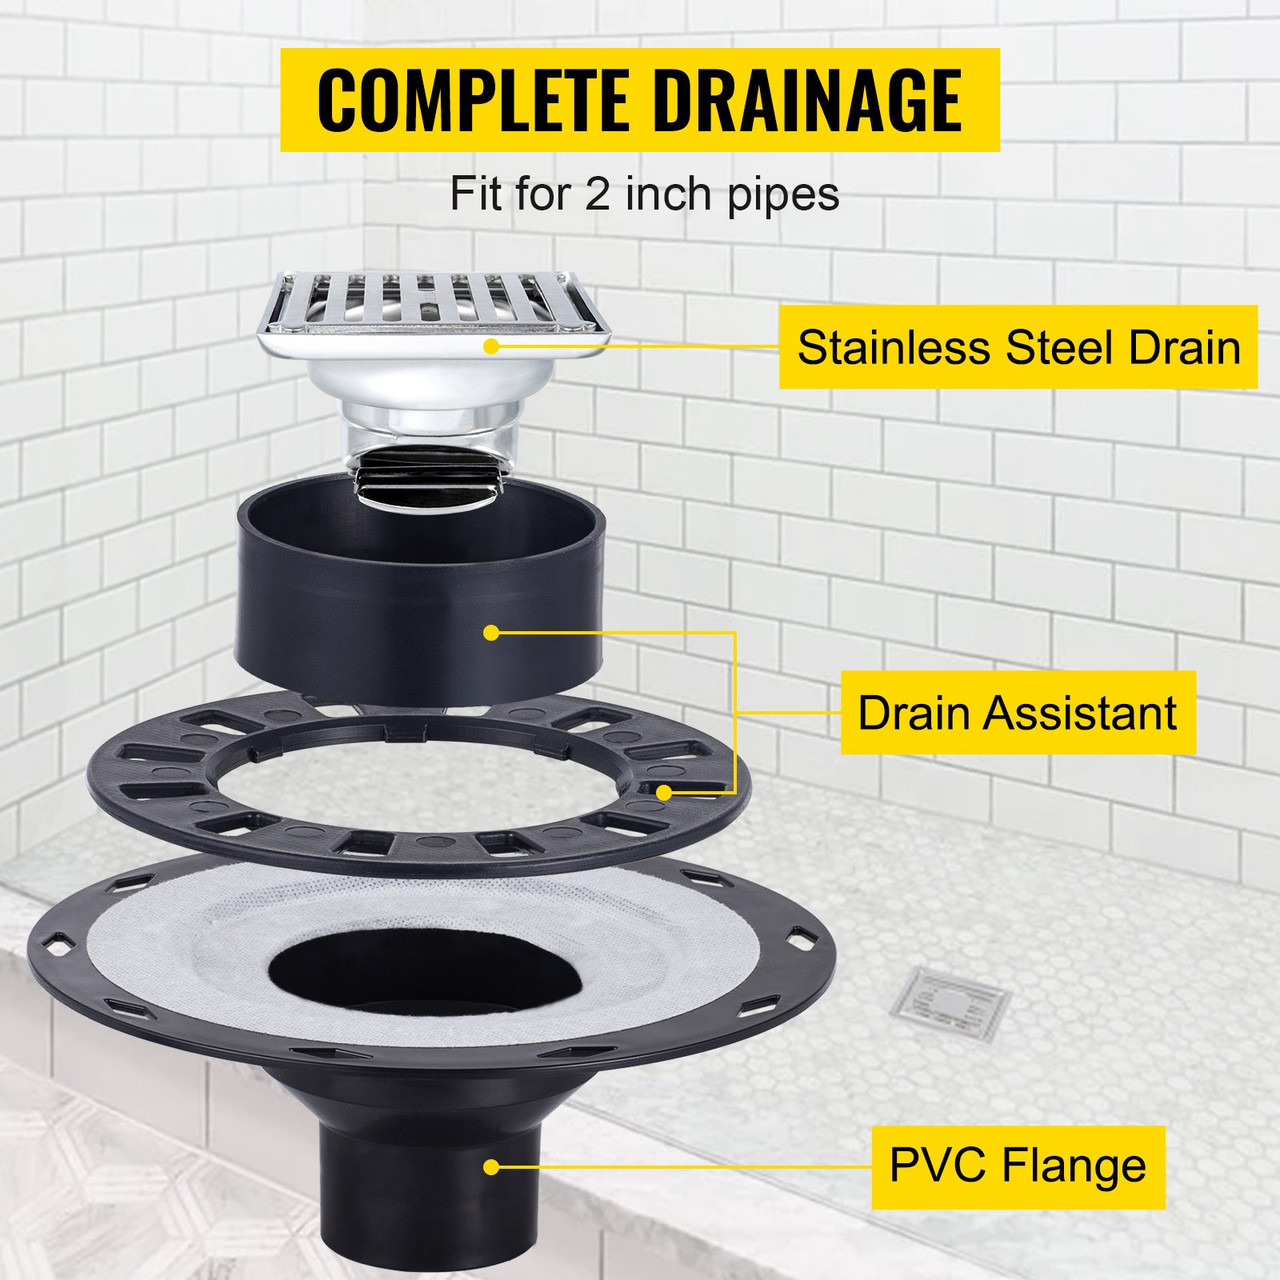 Shower Curb Kit, 38"x60" Watertight Shower Curb Overlay with 4" PVC Central Bonding Flange, 4" Stainless Steel Grate, 2 Cuttable Shower Curb and Trowel, Shower Pan Slope Sticks Fit for Bathroom